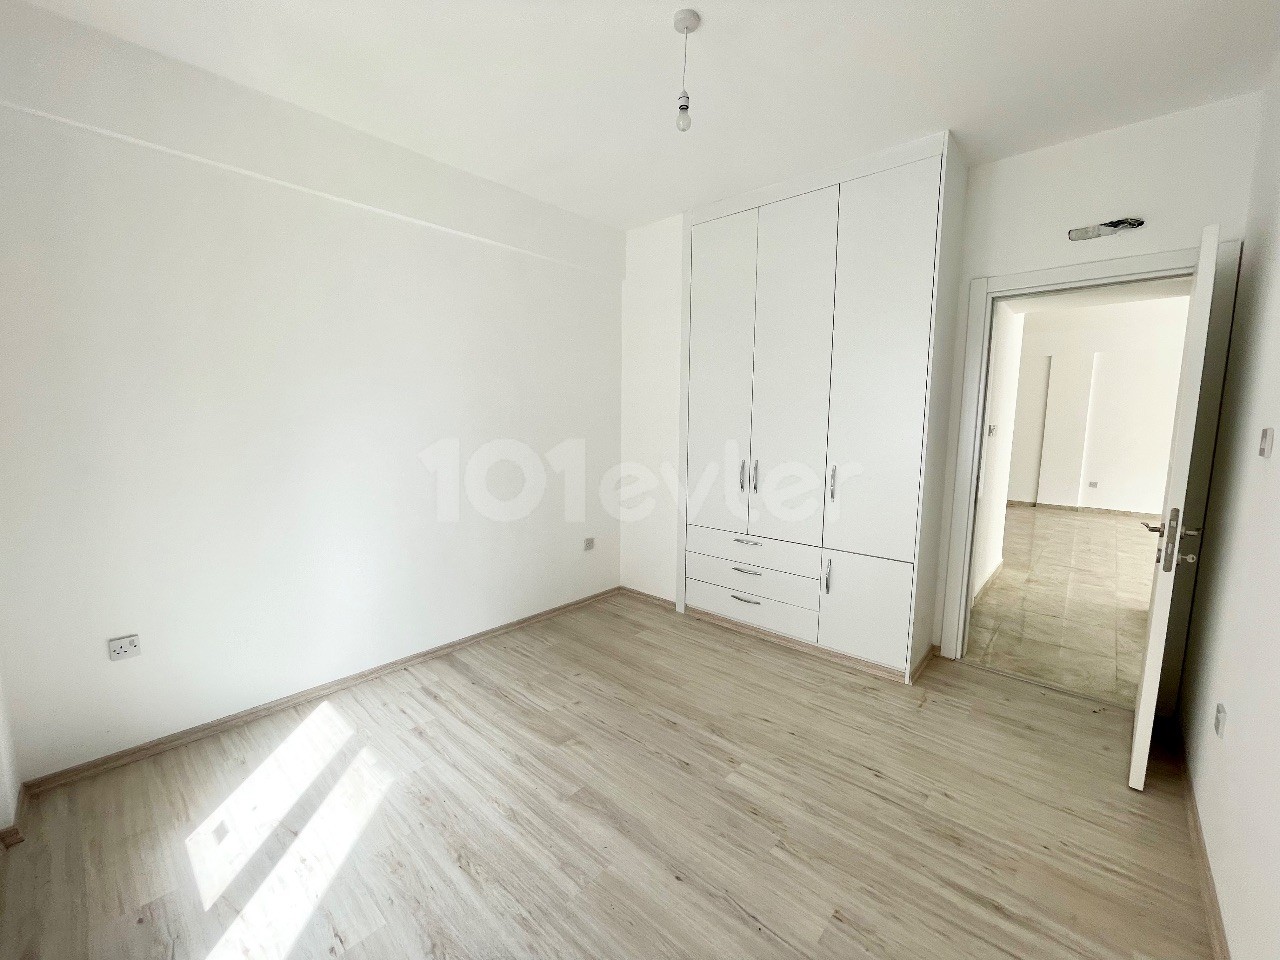 For sale brand new 2+1 large apartment